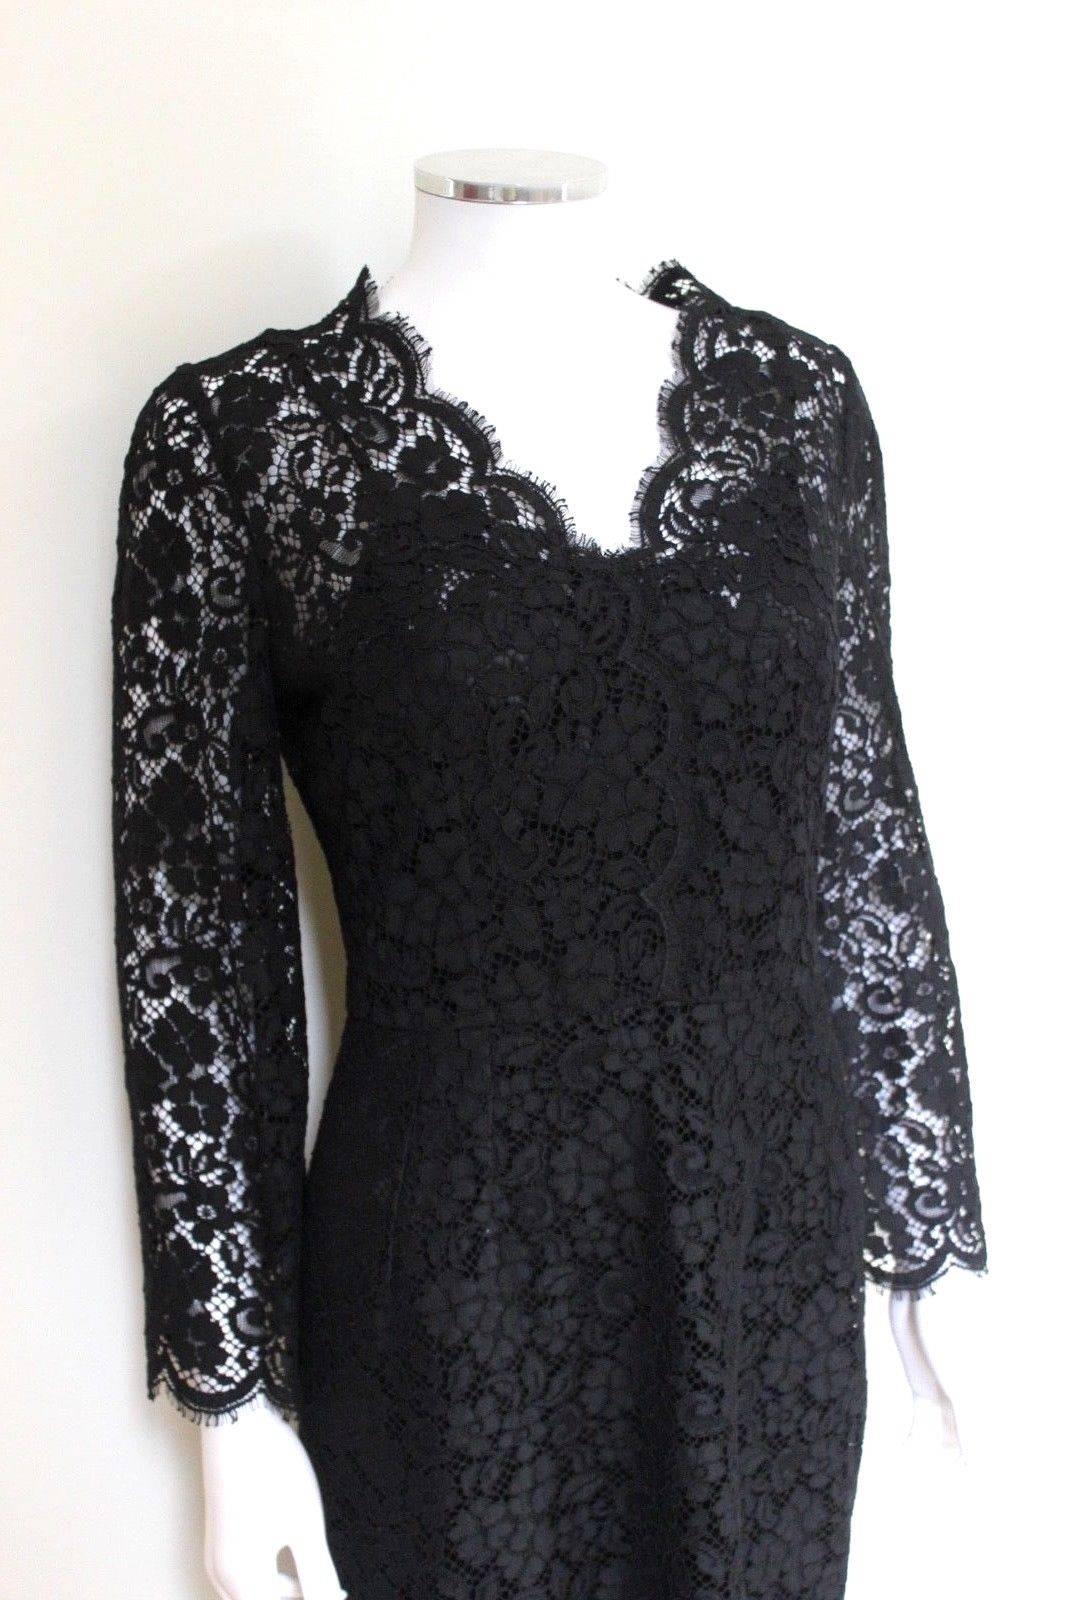 
New £1983 Dolce and Gabbana Black Lace Overlay Dress Italian 44 uk 12
Dolce and Gabbana perfects modern seduction with his signature form fitting silhouettes. 
V neckline.
Long sleeves.
Sheath silhouette.
Scalloped hem.
Hidden back